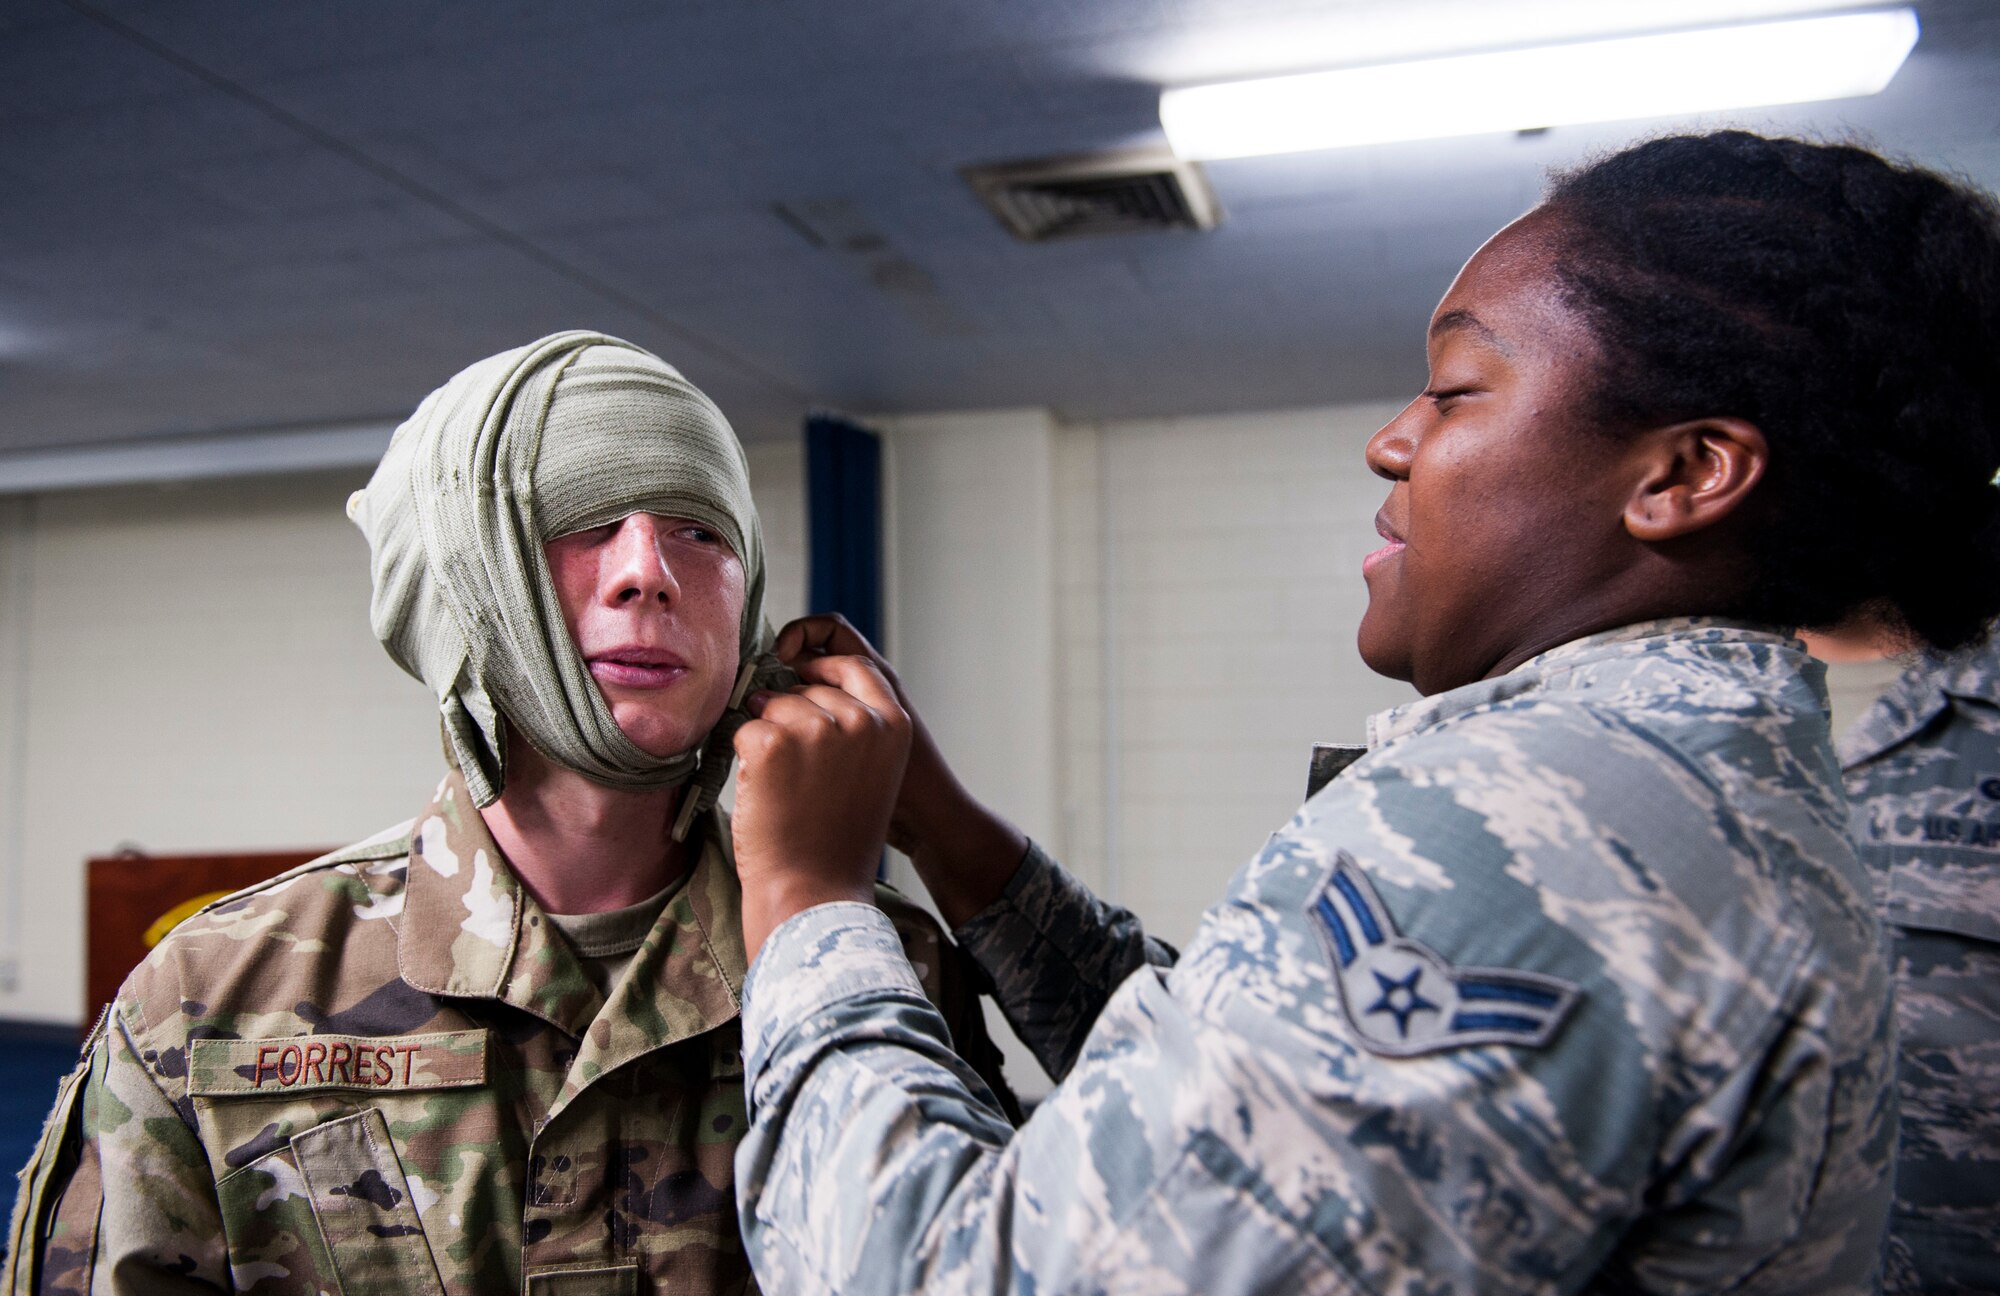 An Airman practices bandaging during Ability to Survive and Operate training at Kadena Air Base, Japan, Sept. 12, 2019. The ATSO training tested Airmen with various emergency situations including chemical attacks, unexploded ordnance and Self-Aid and Buddy Care. (U.S. Air Force photo by Naoto Anazawa)